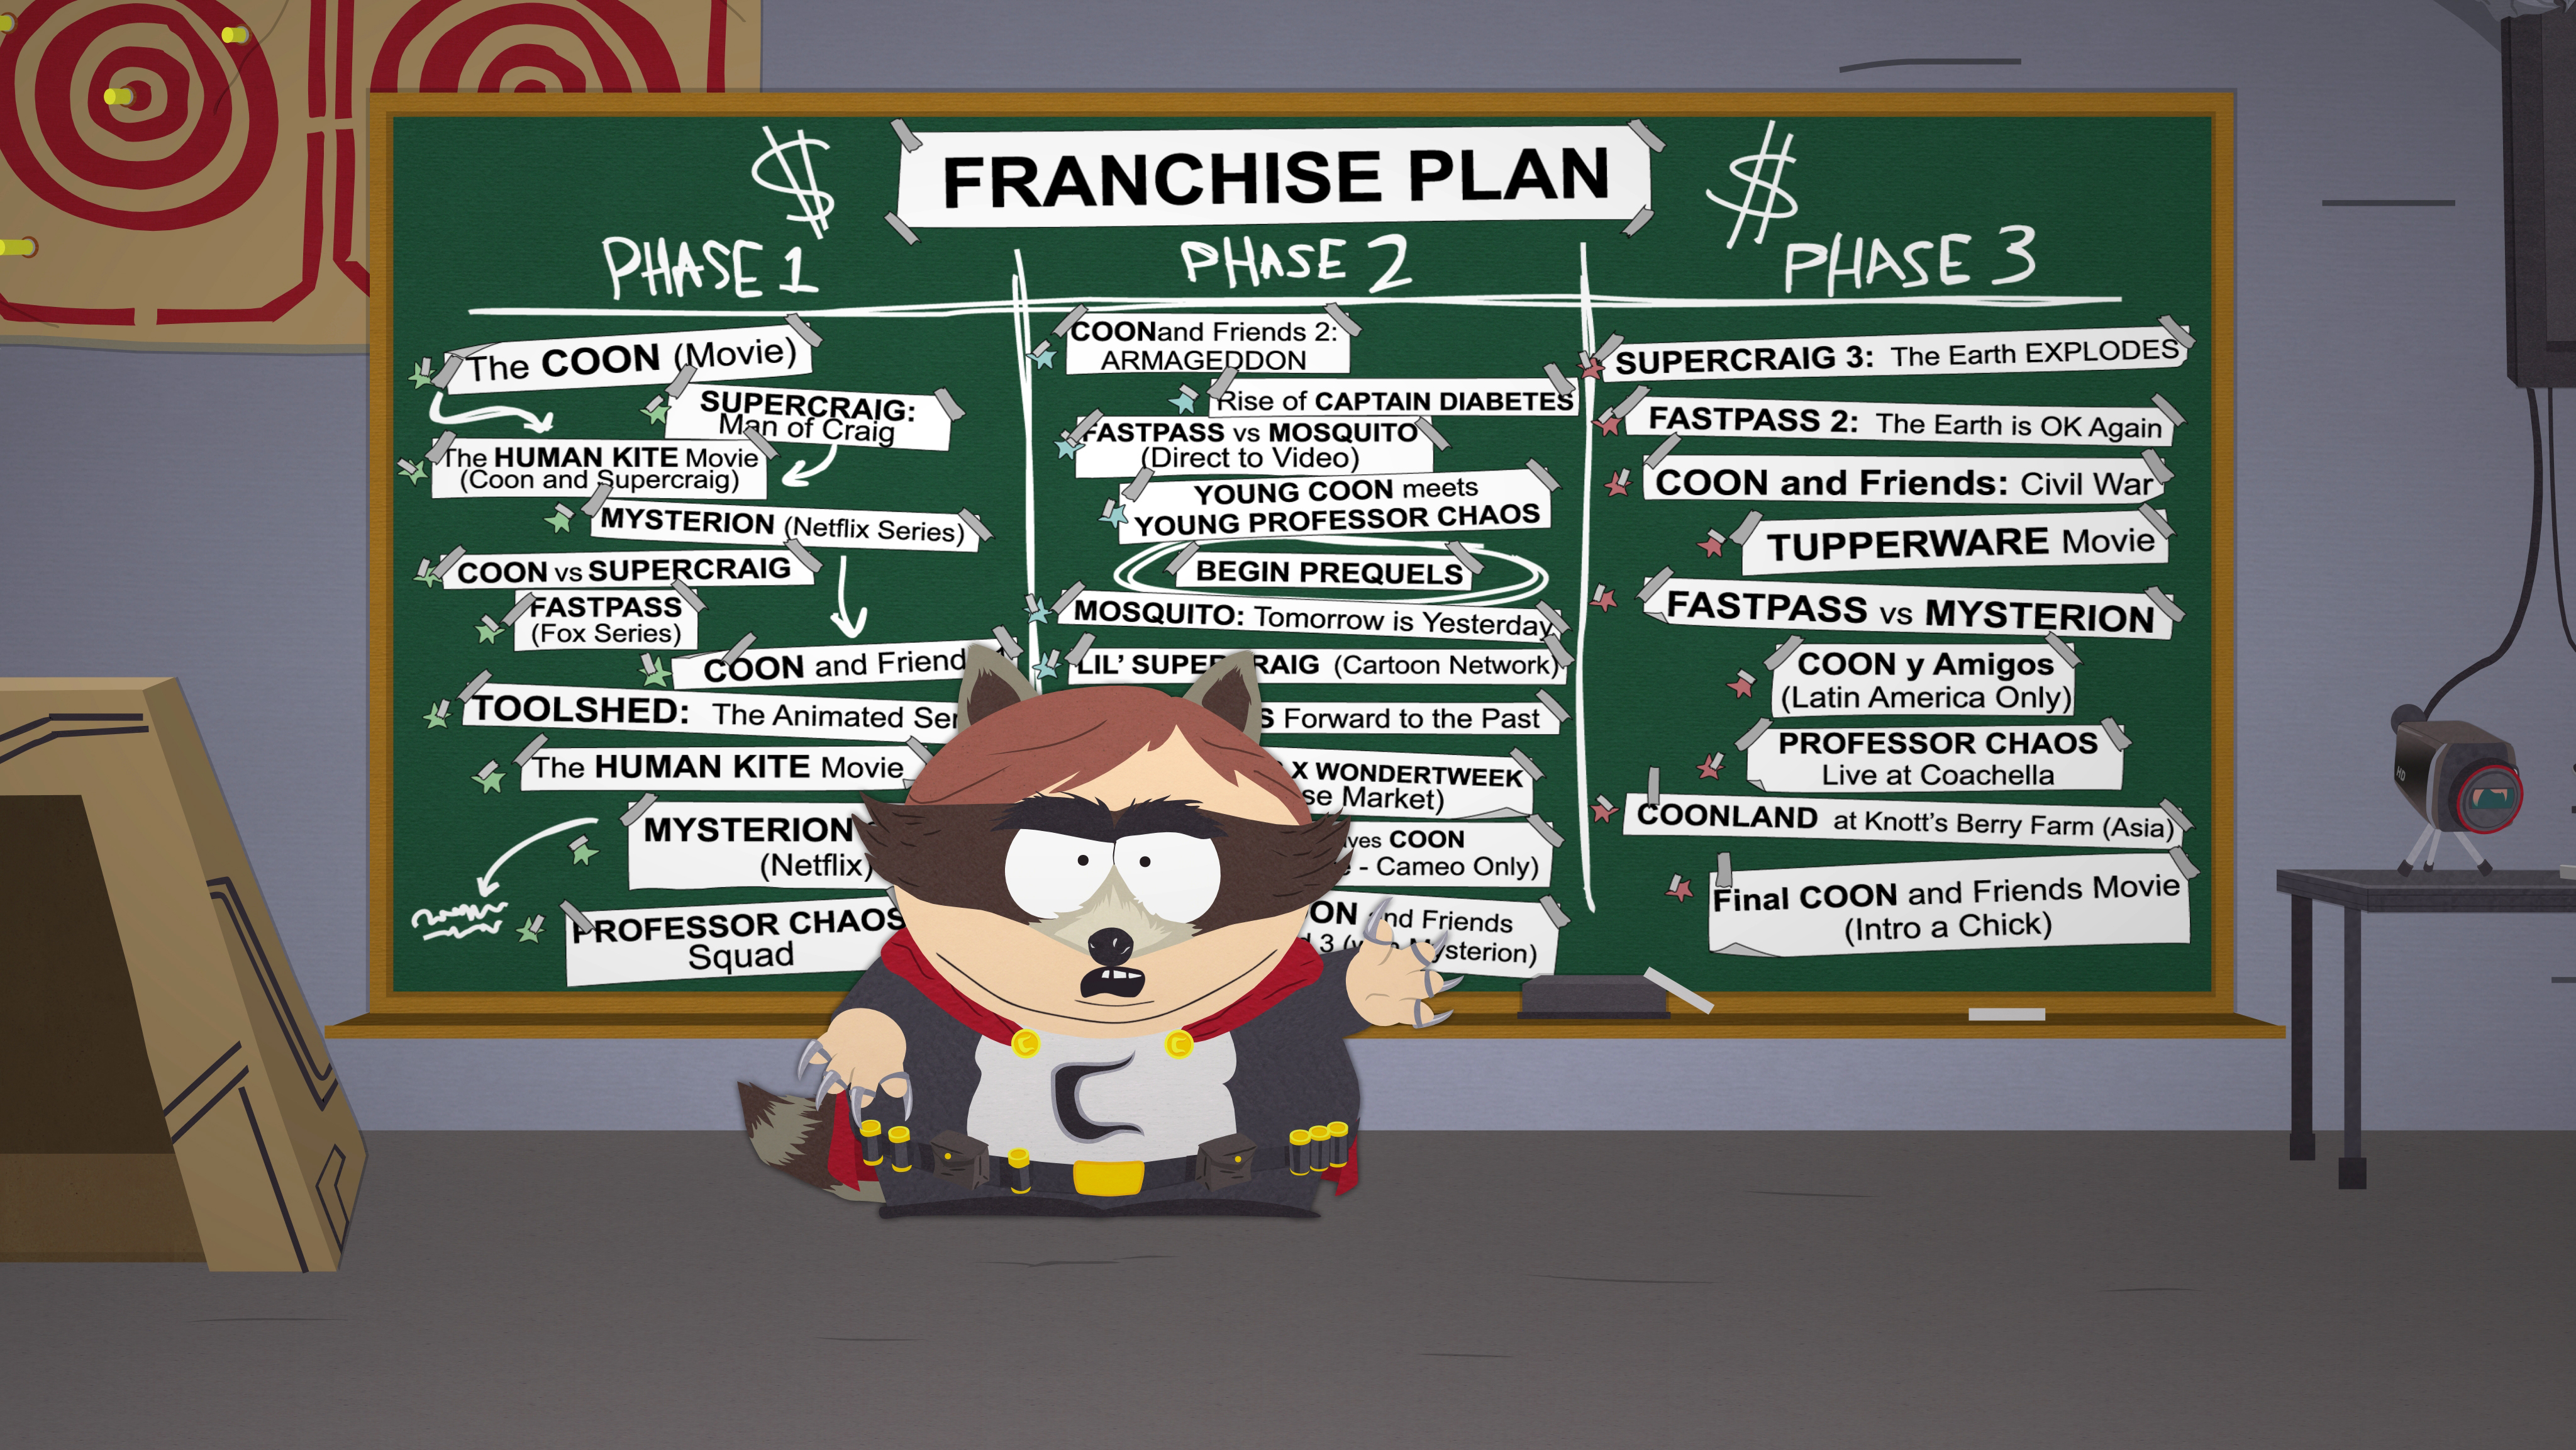 South Park: The Fractured But Whole screenshot